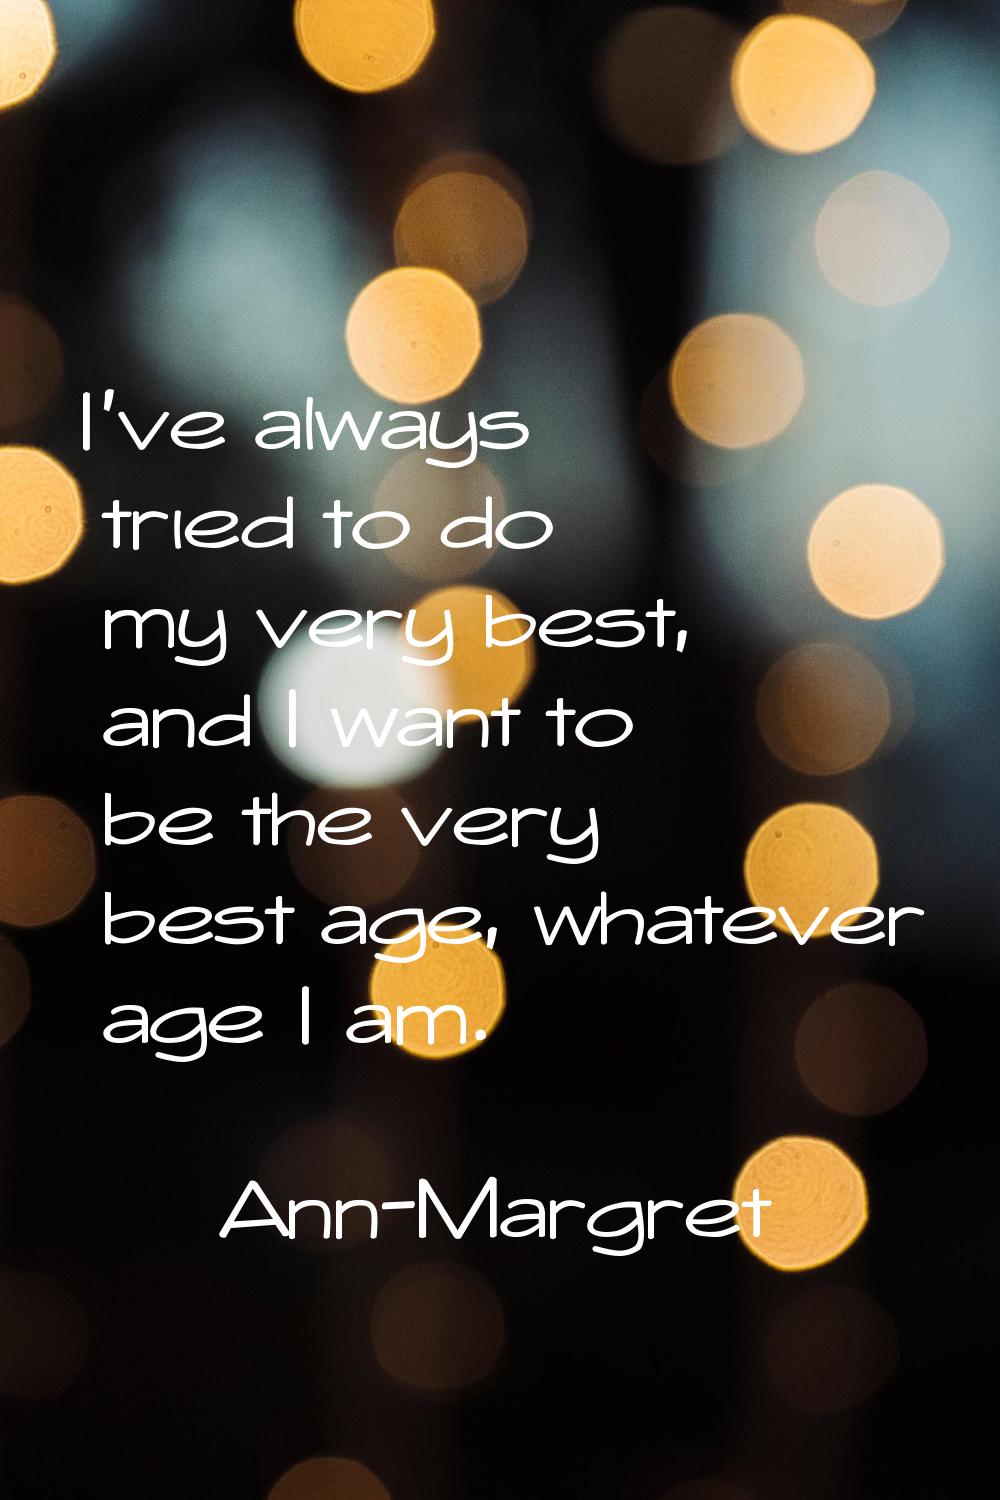 I've always tried to do my very best, and I want to be the very best age, whatever age I am.